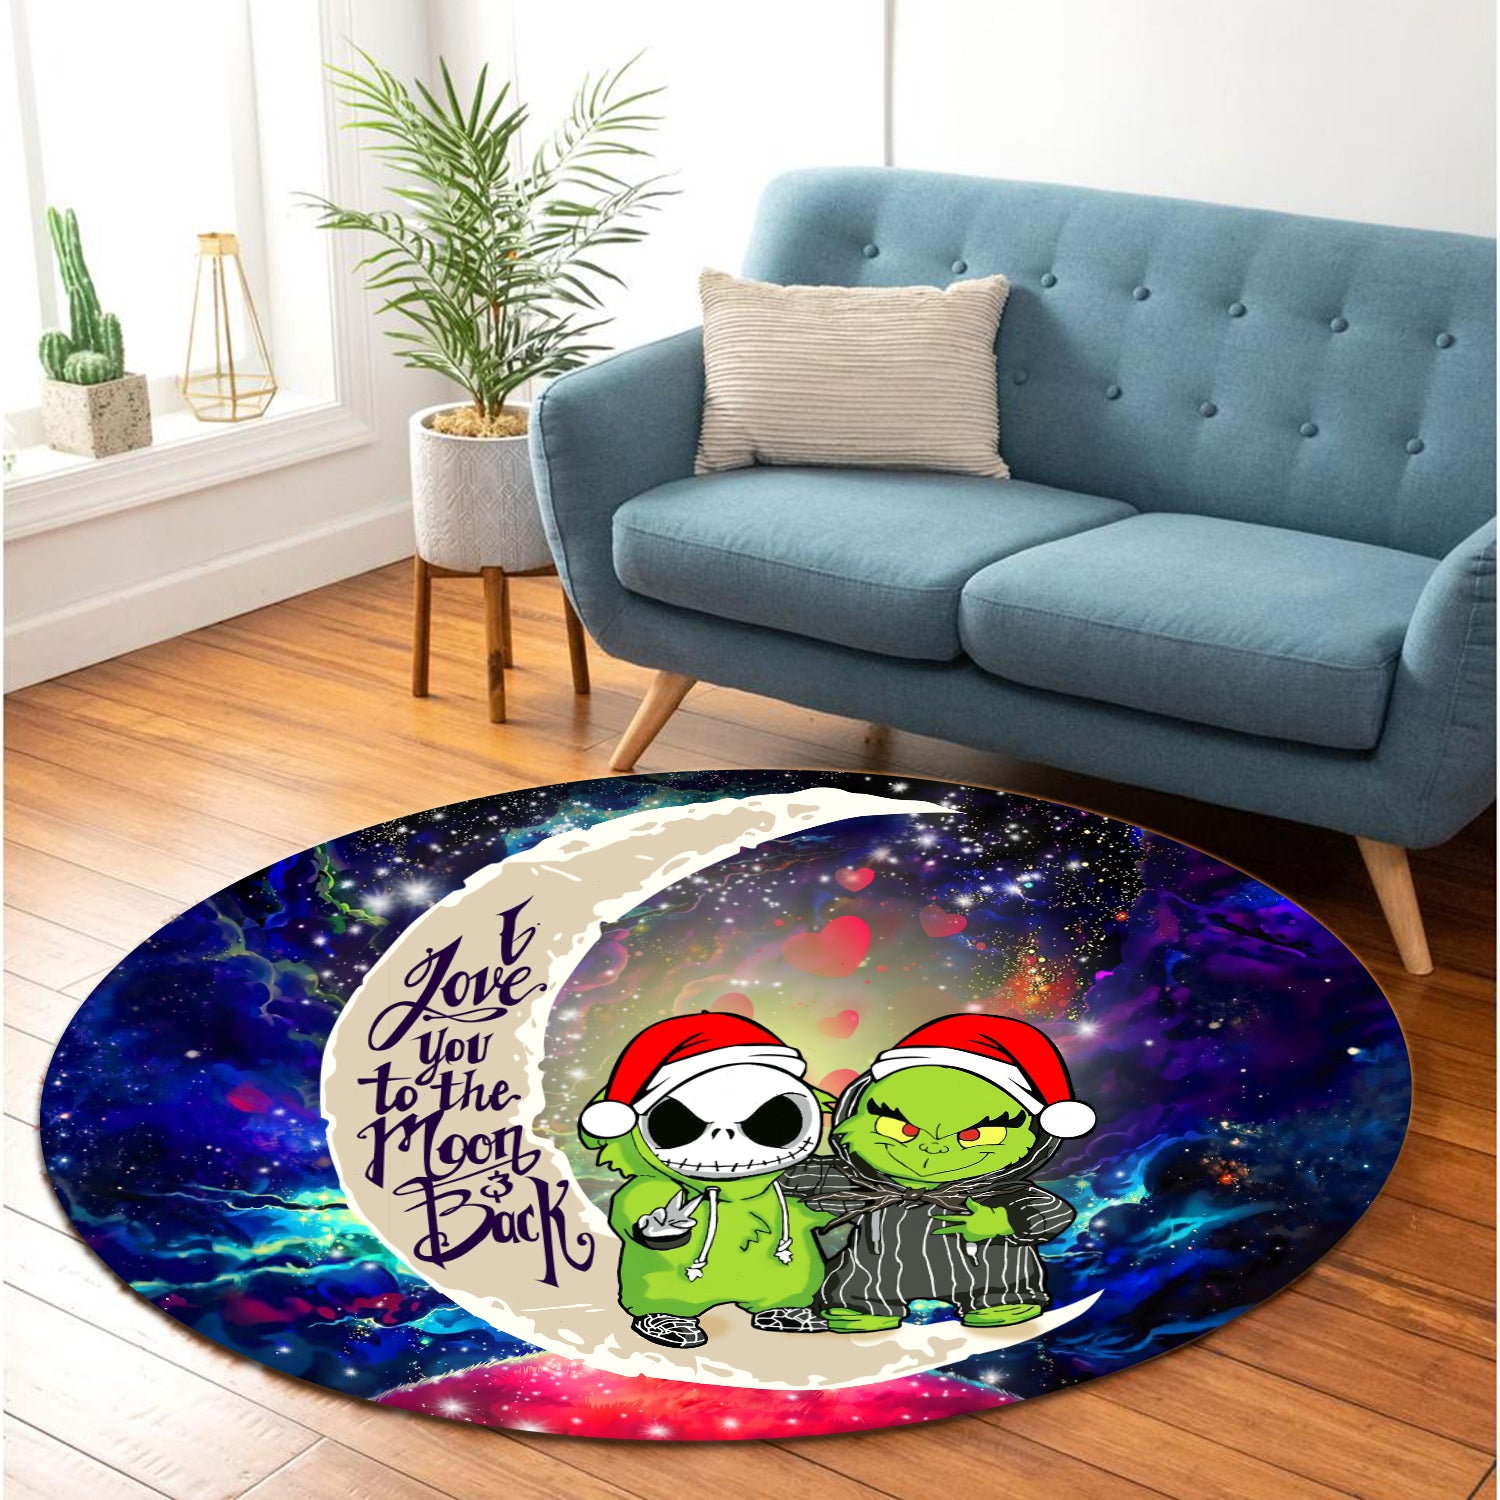 Grinch And Jack Nightmare Before Christmas Love You To The Moon Galaxy Round Carpet Rug Bedroom Livingroom Home Decor Nearkii